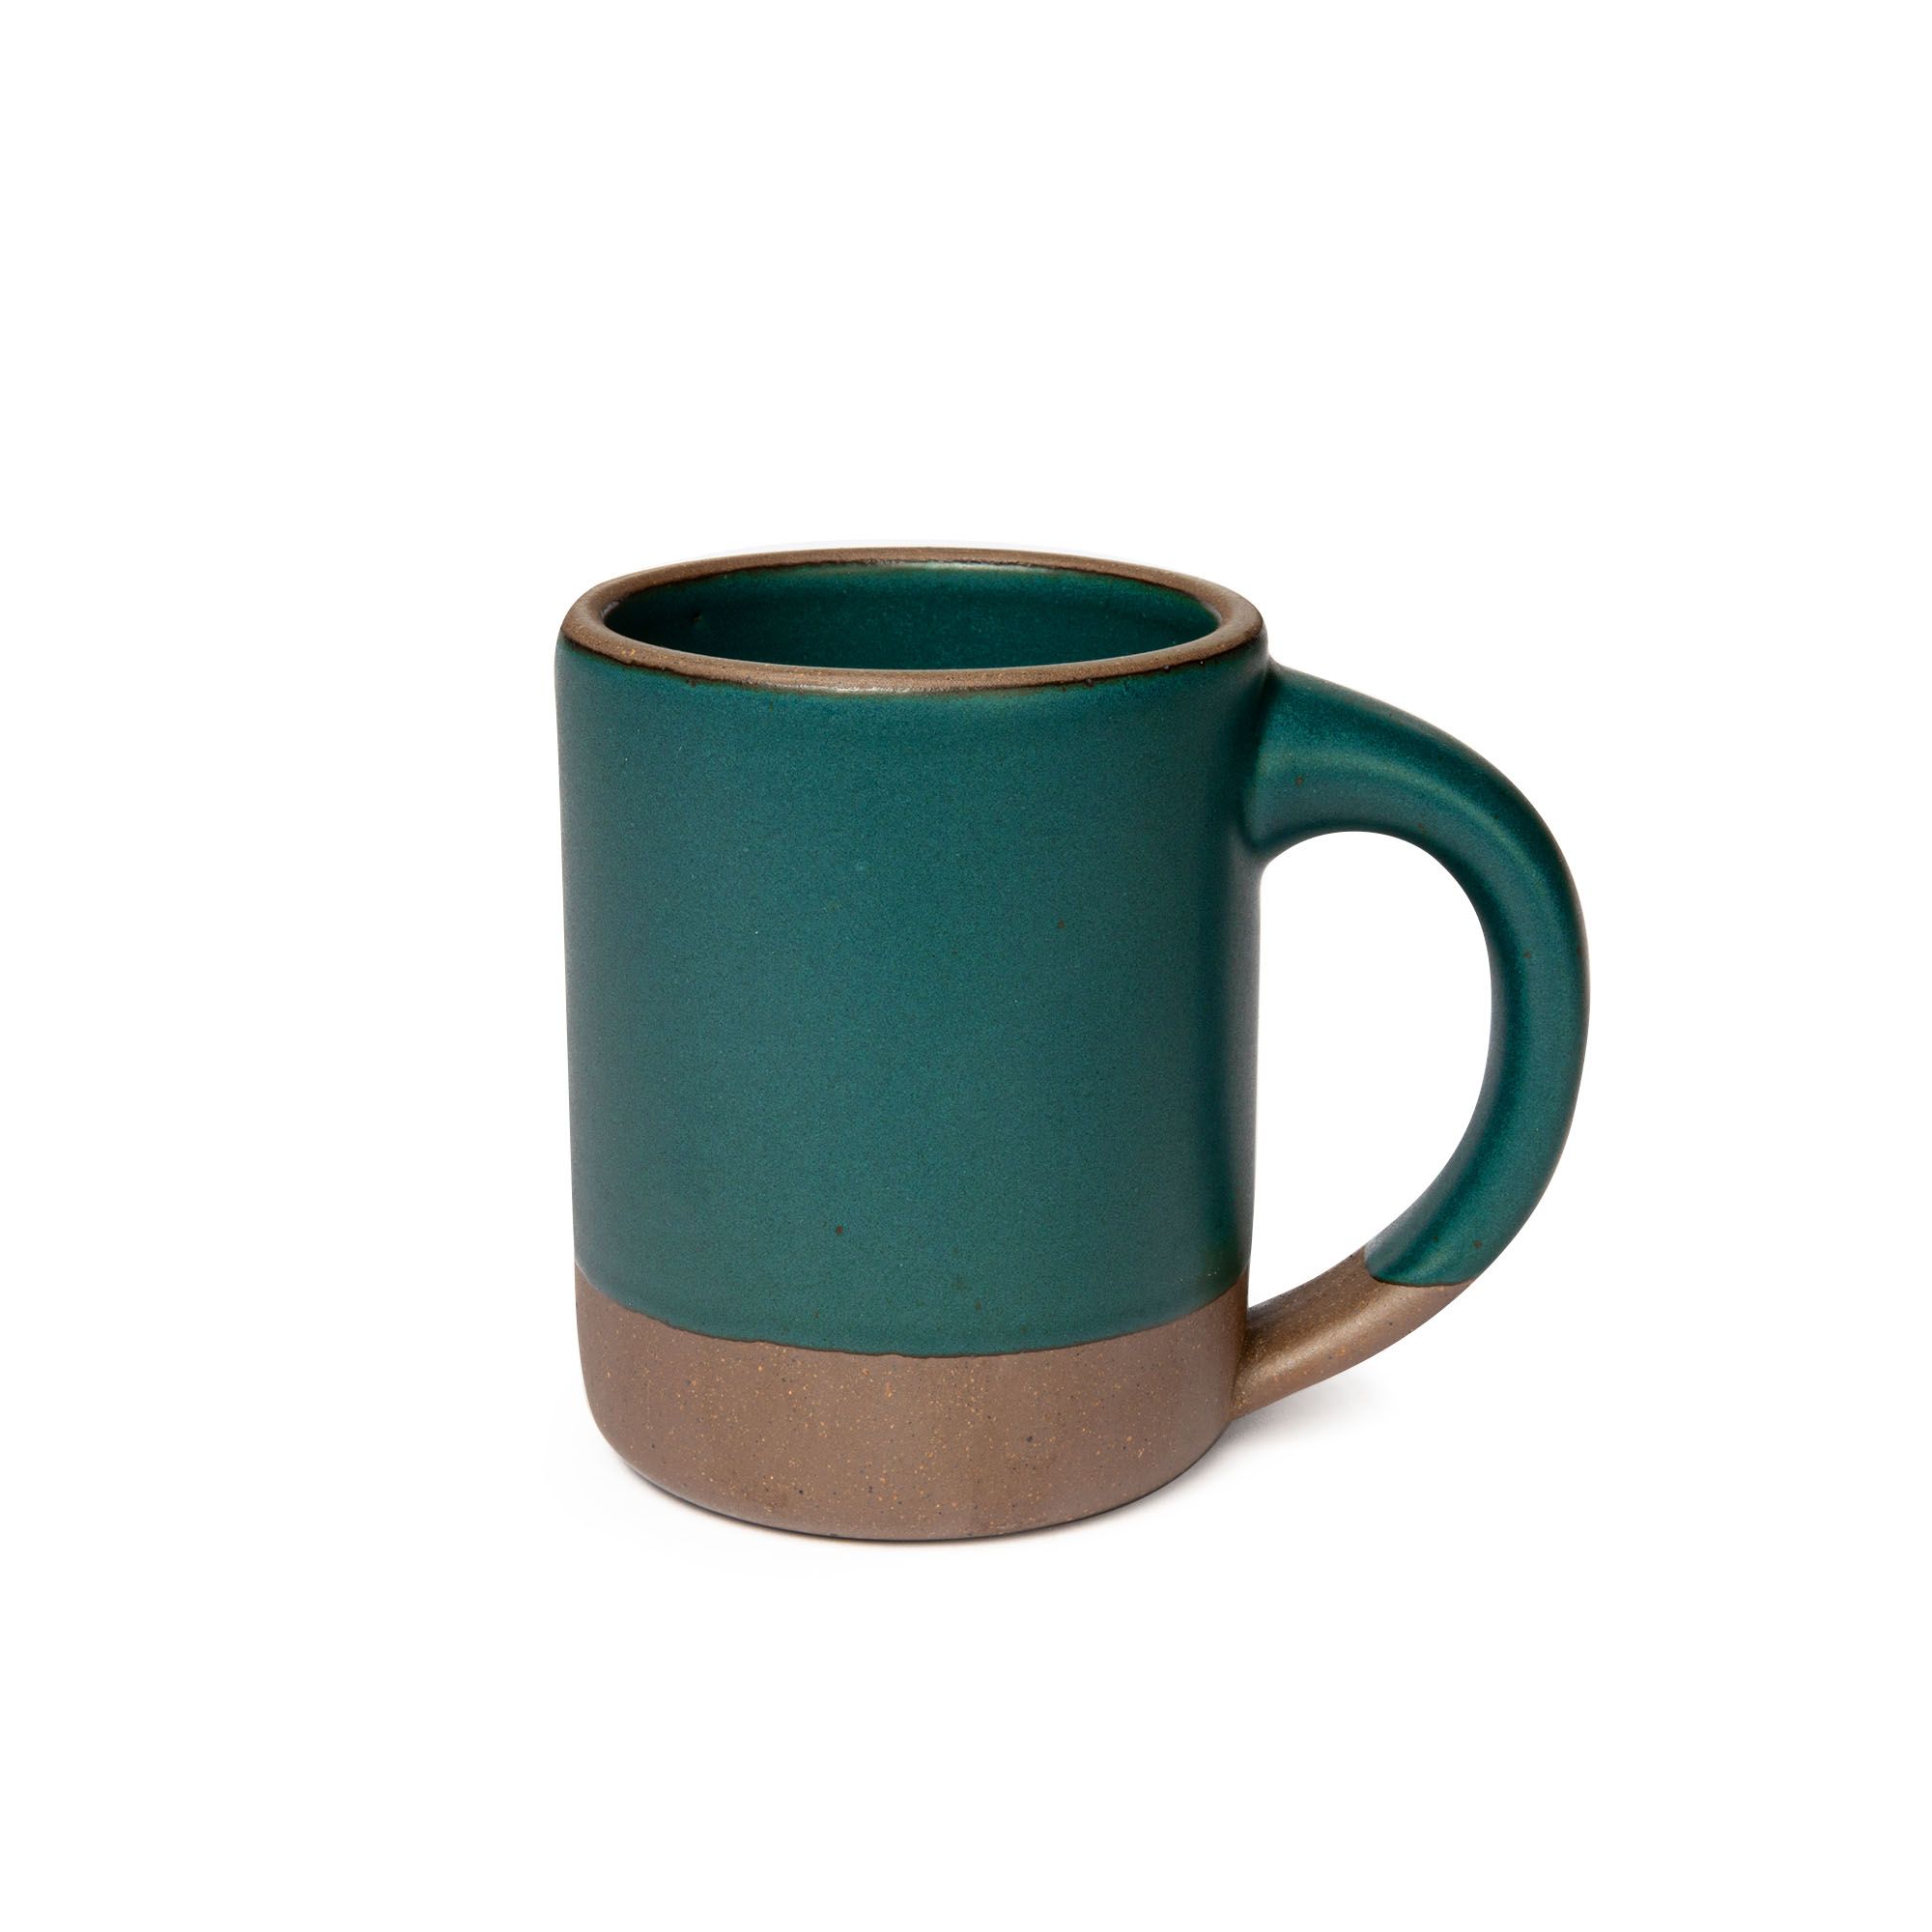 A big sized ceramic mug with handle in a deep, dark teal color featuring iron speckles and unglazed rim and bottom base.